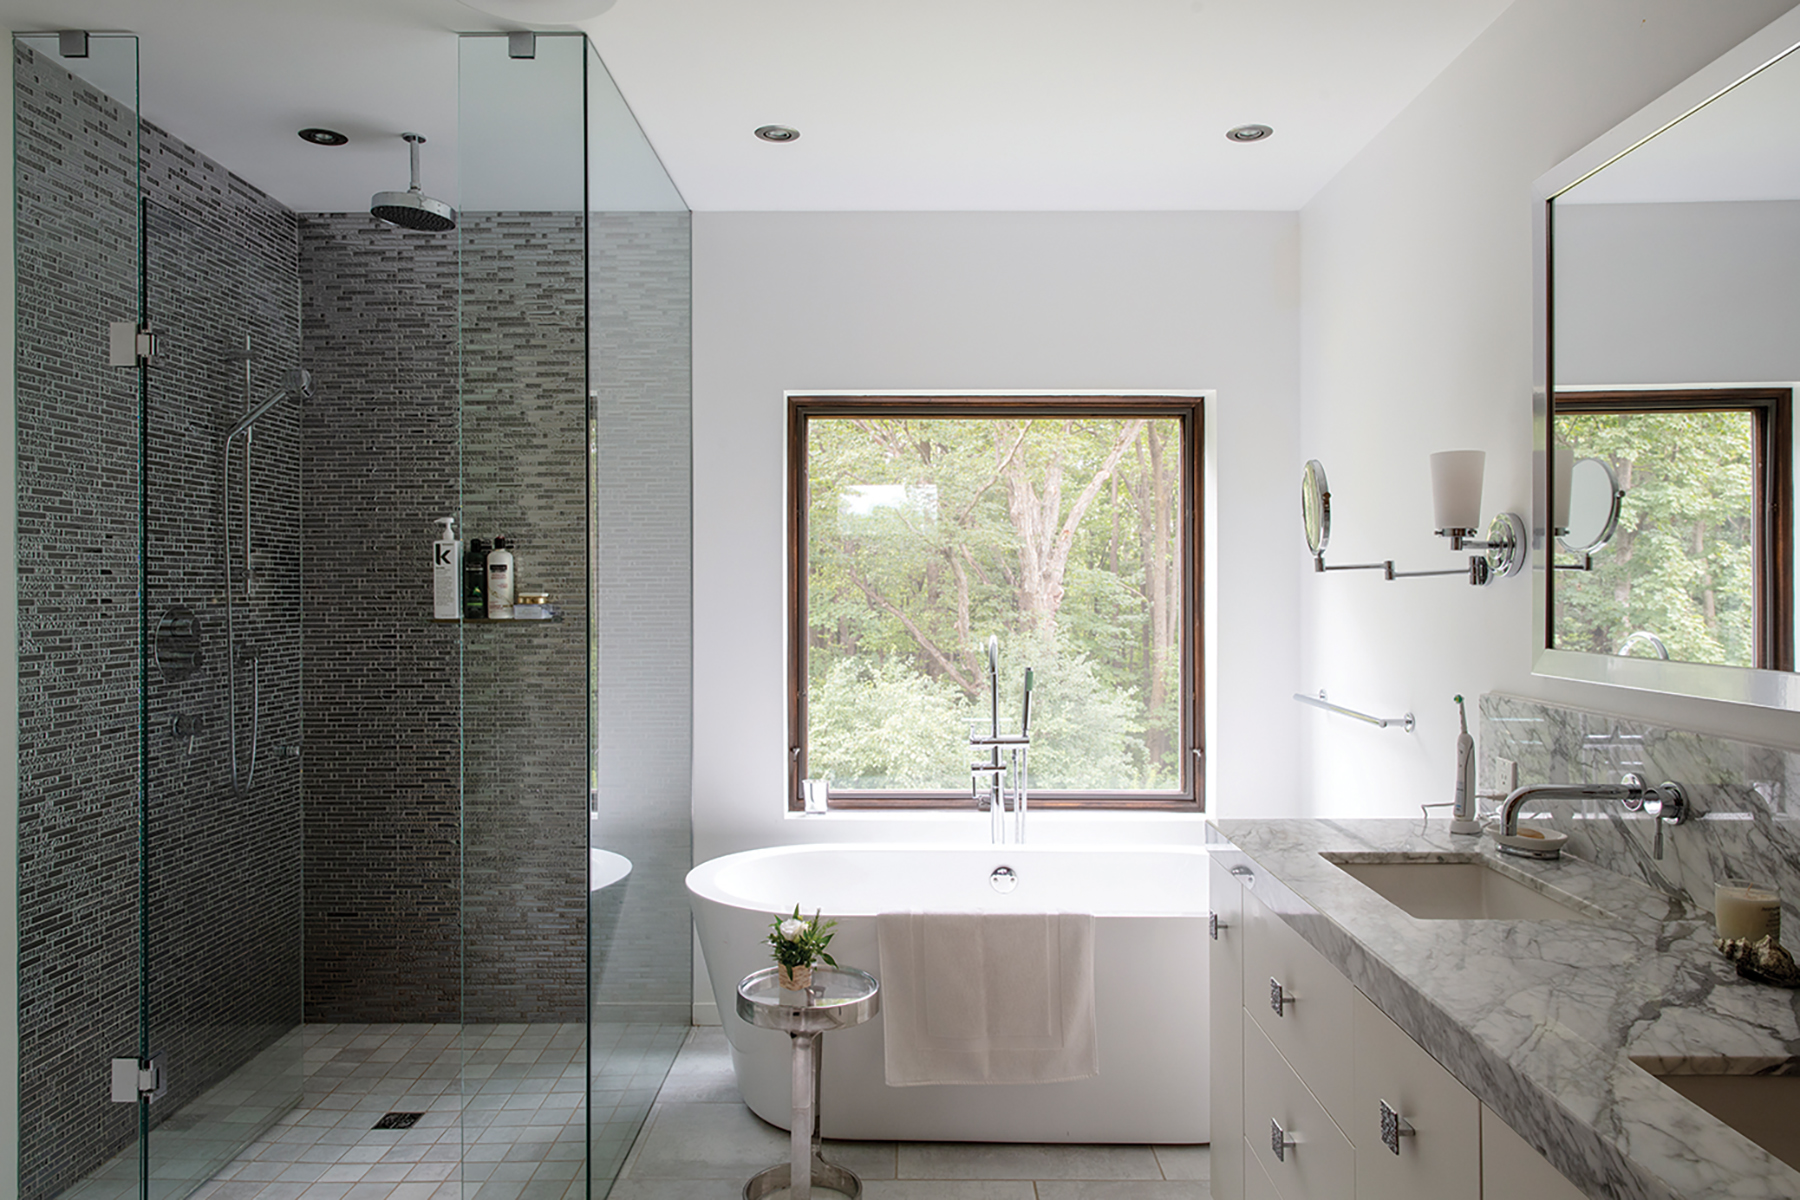 The master bath boasts a soaker tub with a view, a glassed-in shower and Carrara marble vanity top.